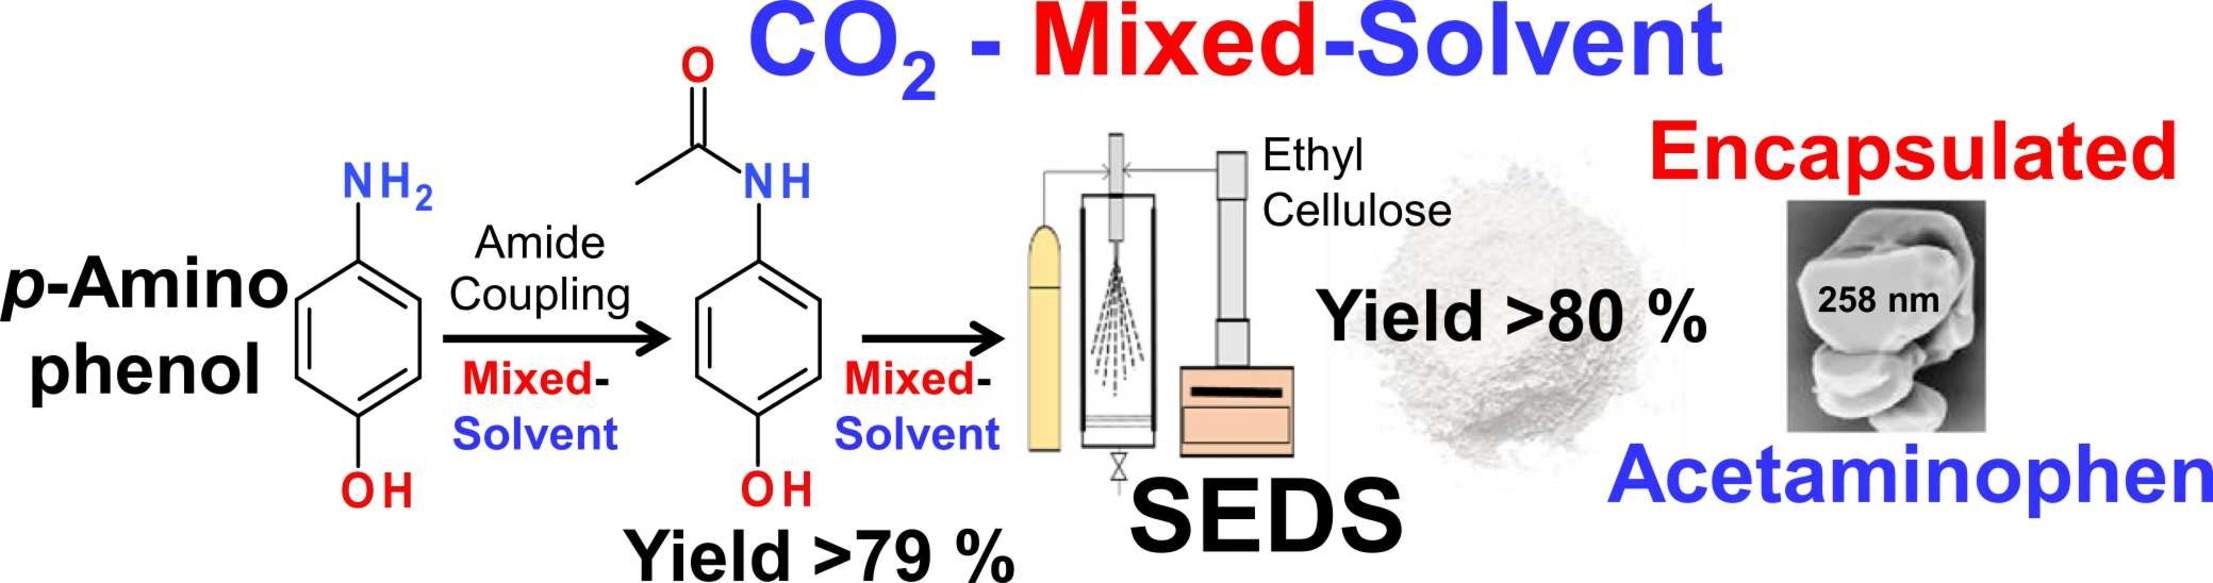 Acetaminophen Synthesis and Encapsulation using Safe Mixed-Solvents and Solution Enhanced Dispersion by Supercritical CO2